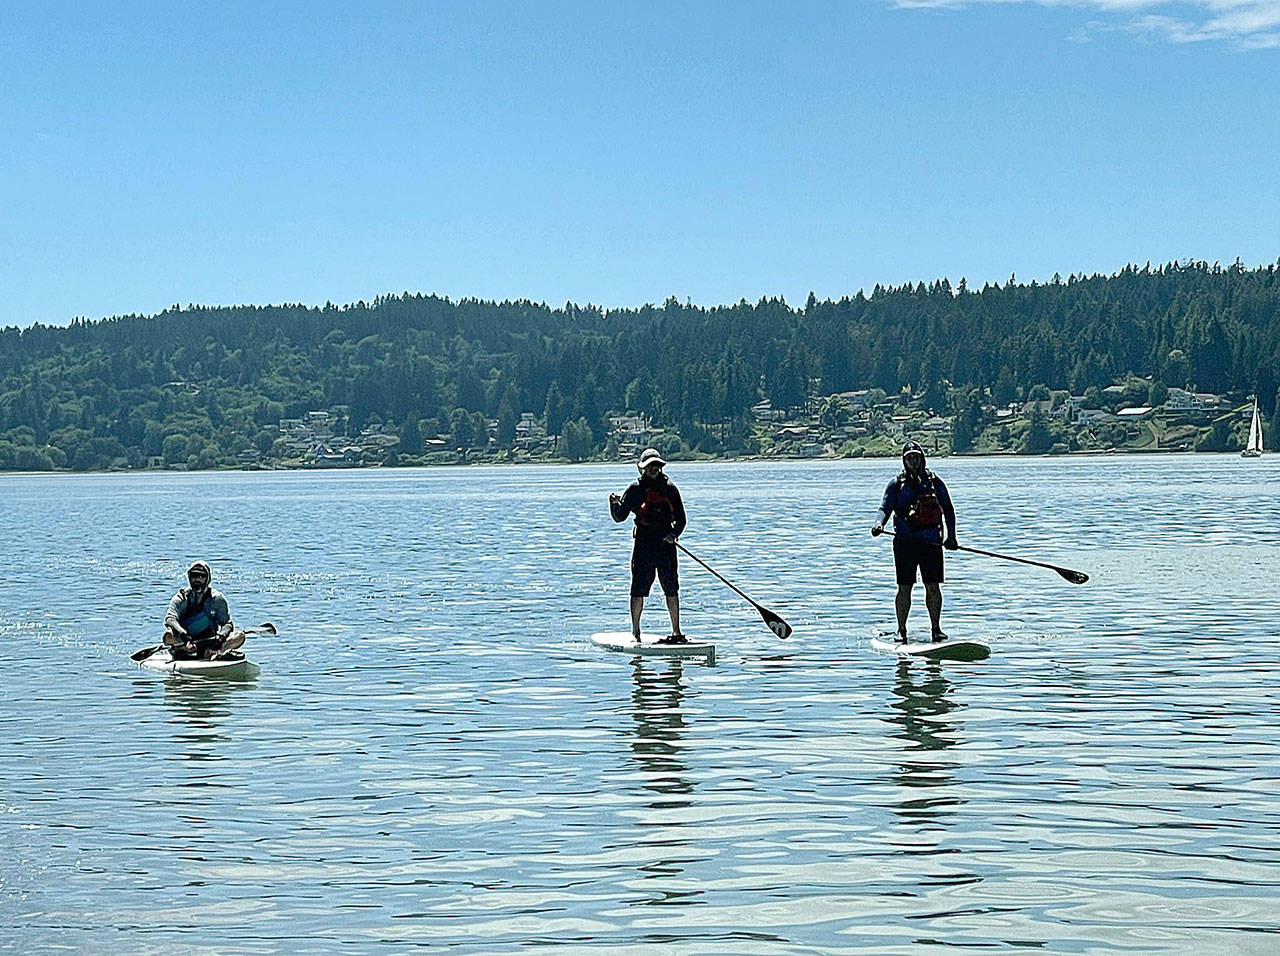 Chad Rounds, Jimmy Lee Burrus and Ryan Hough on the water at the completion of the Warrior Paddle. (Contributed photo)